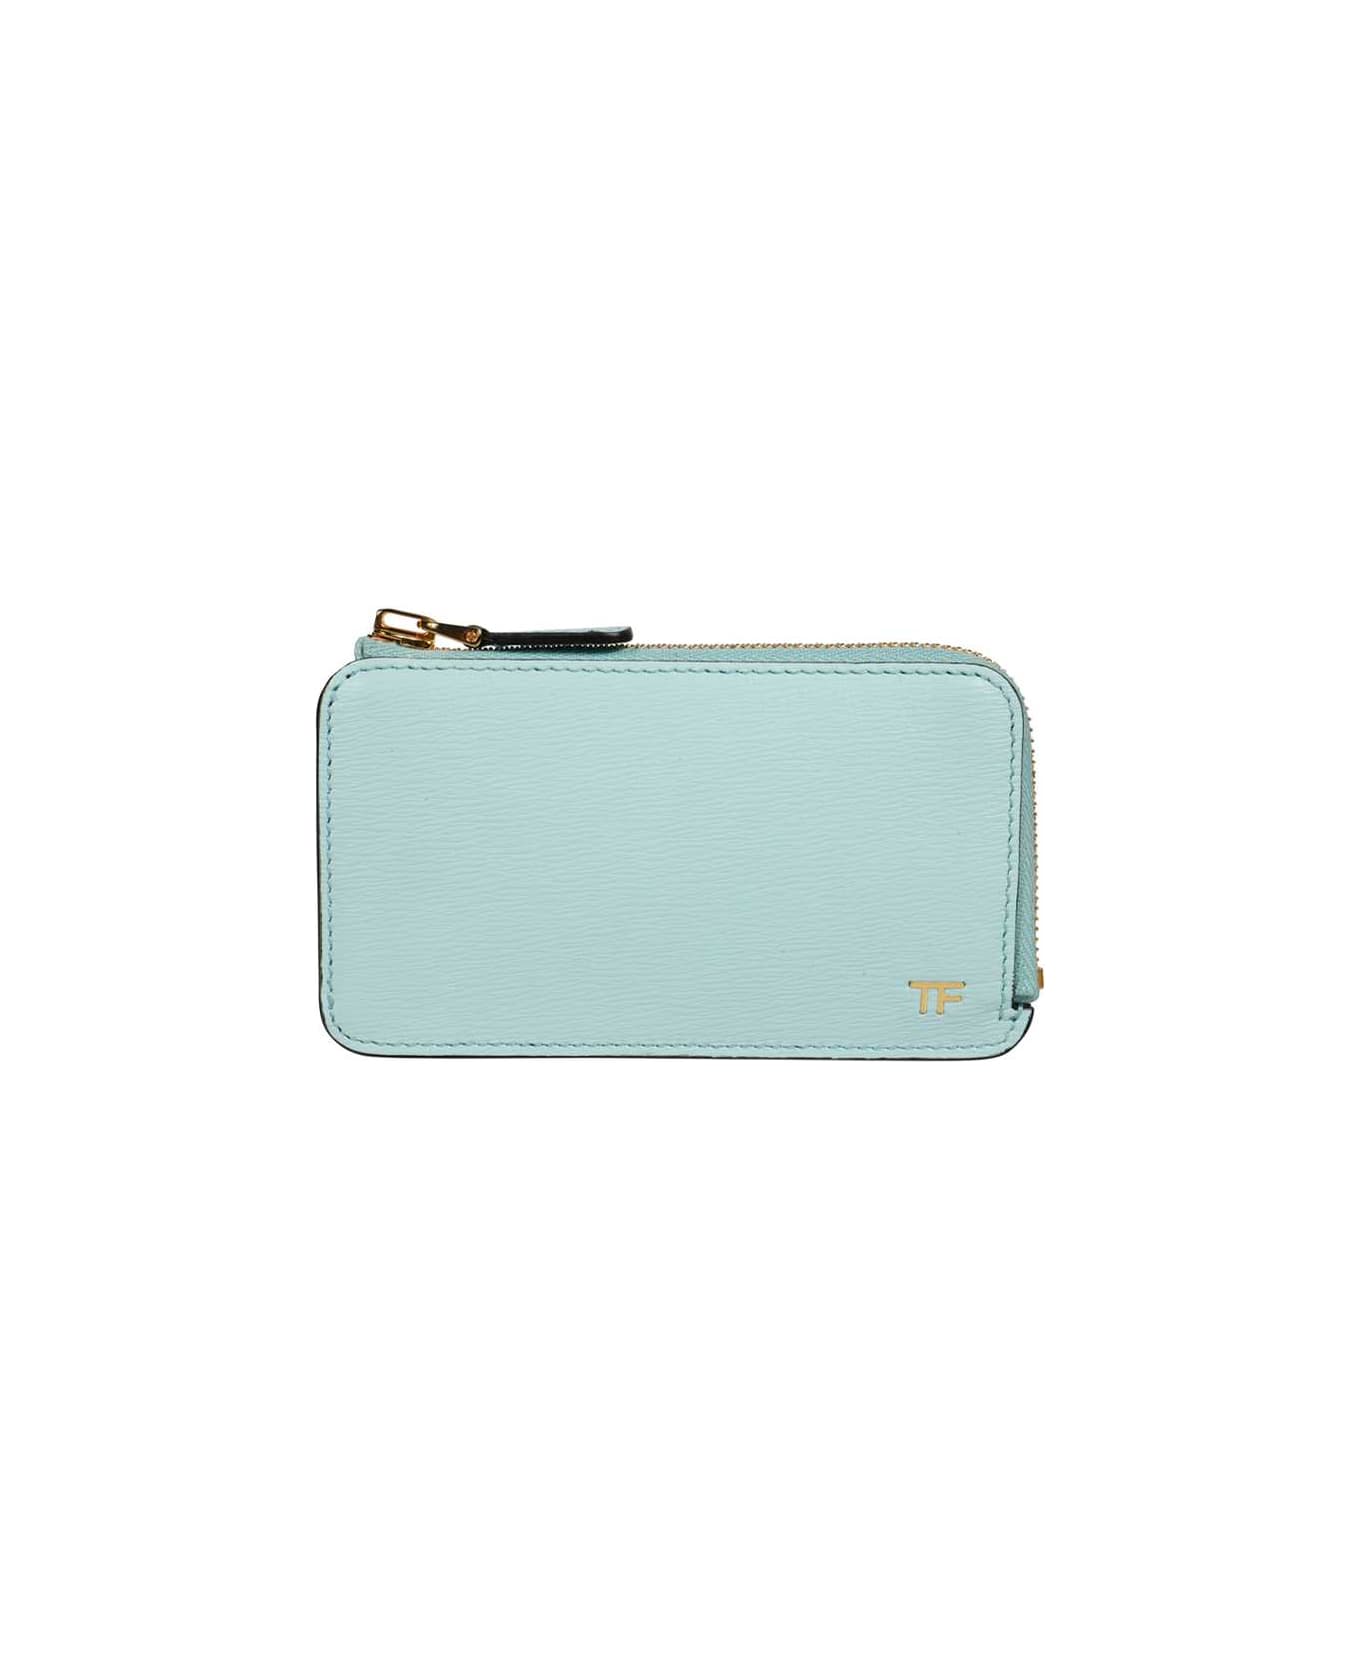 Tom Ford Printed Leather Wallet - Light Blue 財布